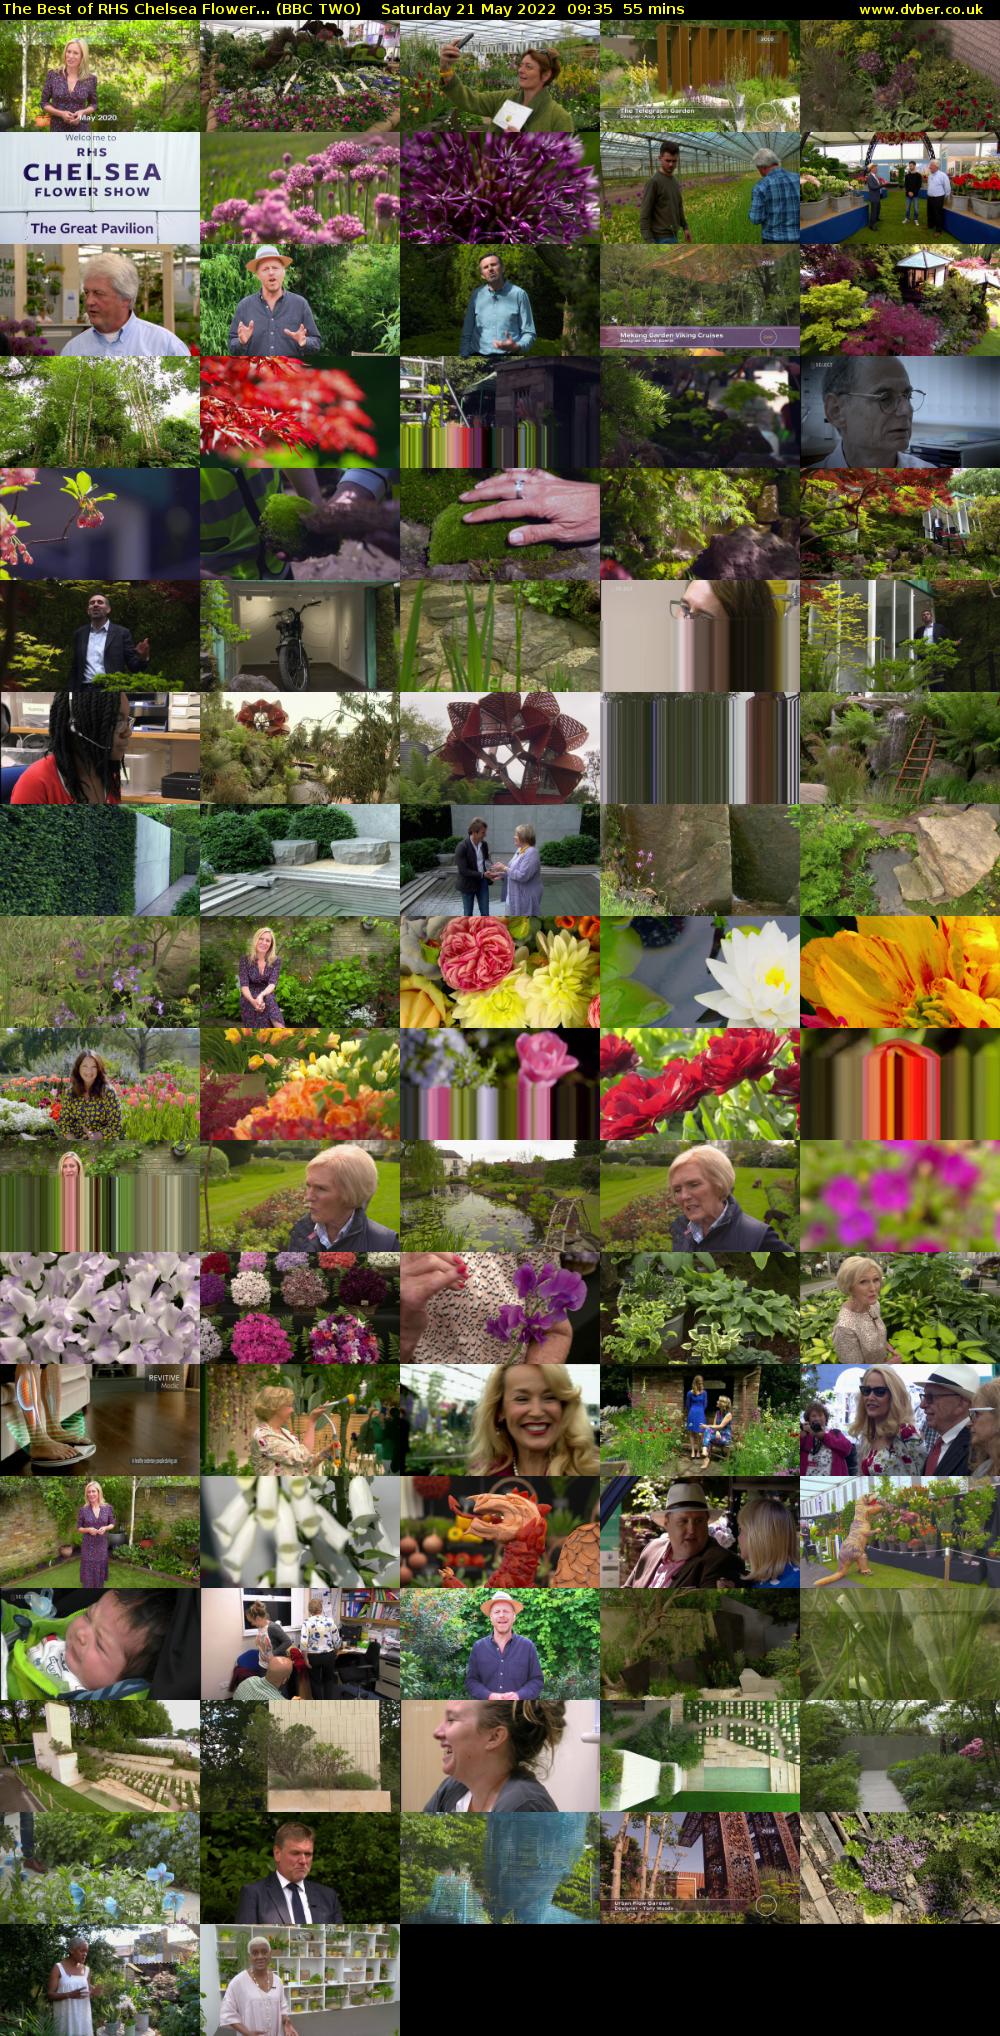 The Best of RHS Chelsea Flower... (BBC TWO) Saturday 21 May 2022 09:35 - 10:30